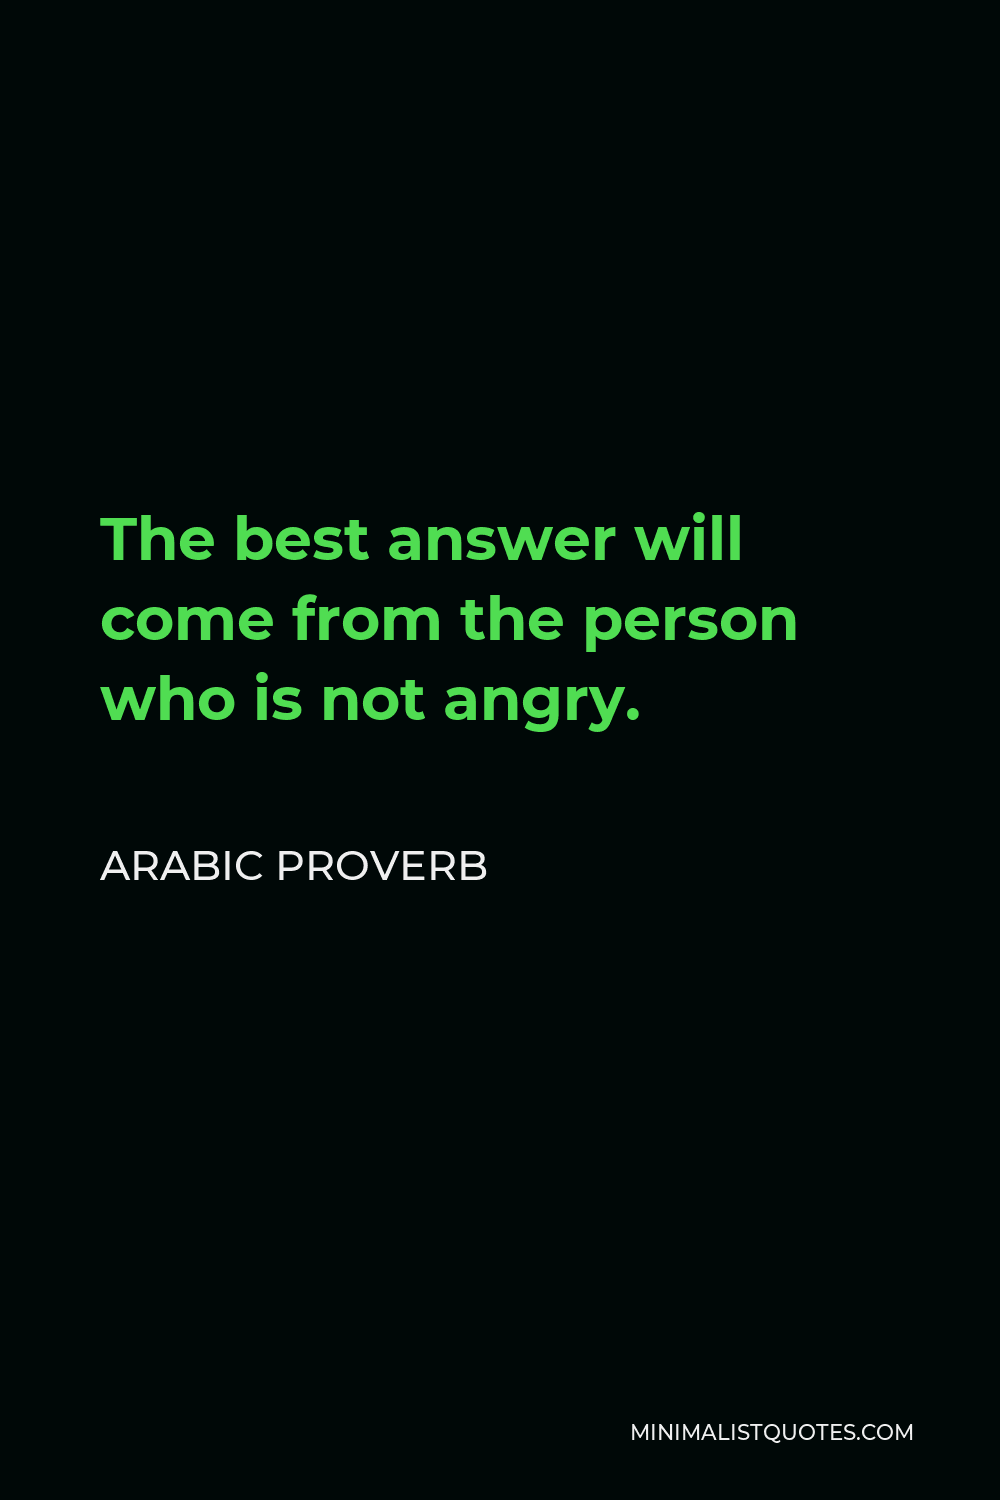 Arabic Proverb Quote - The best answer will come from the person who is not angry.